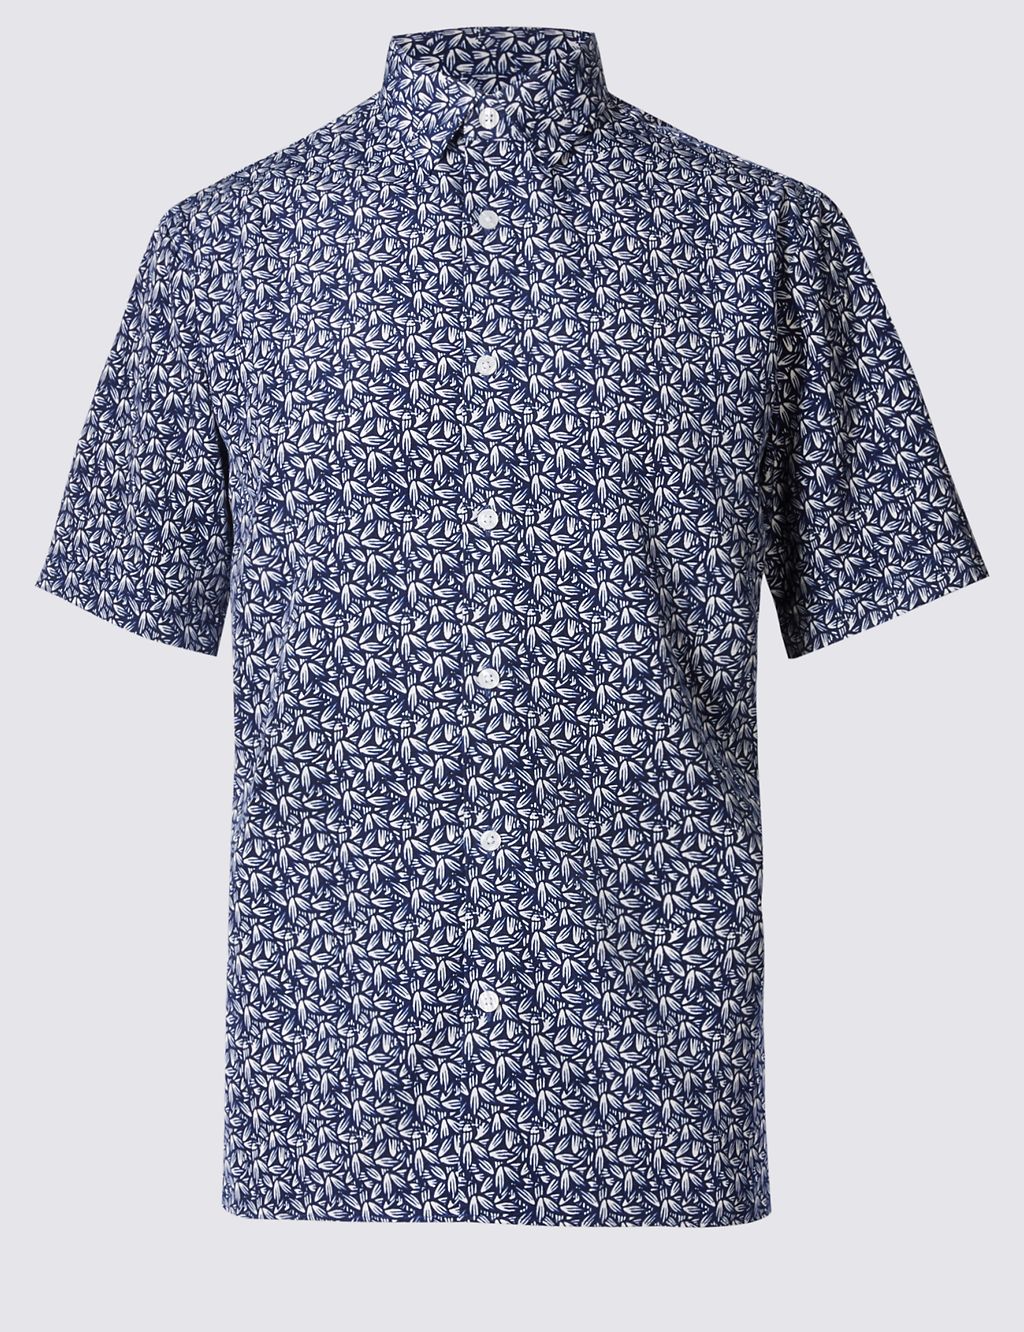 Easy Care Printed Shirt 1 of 3